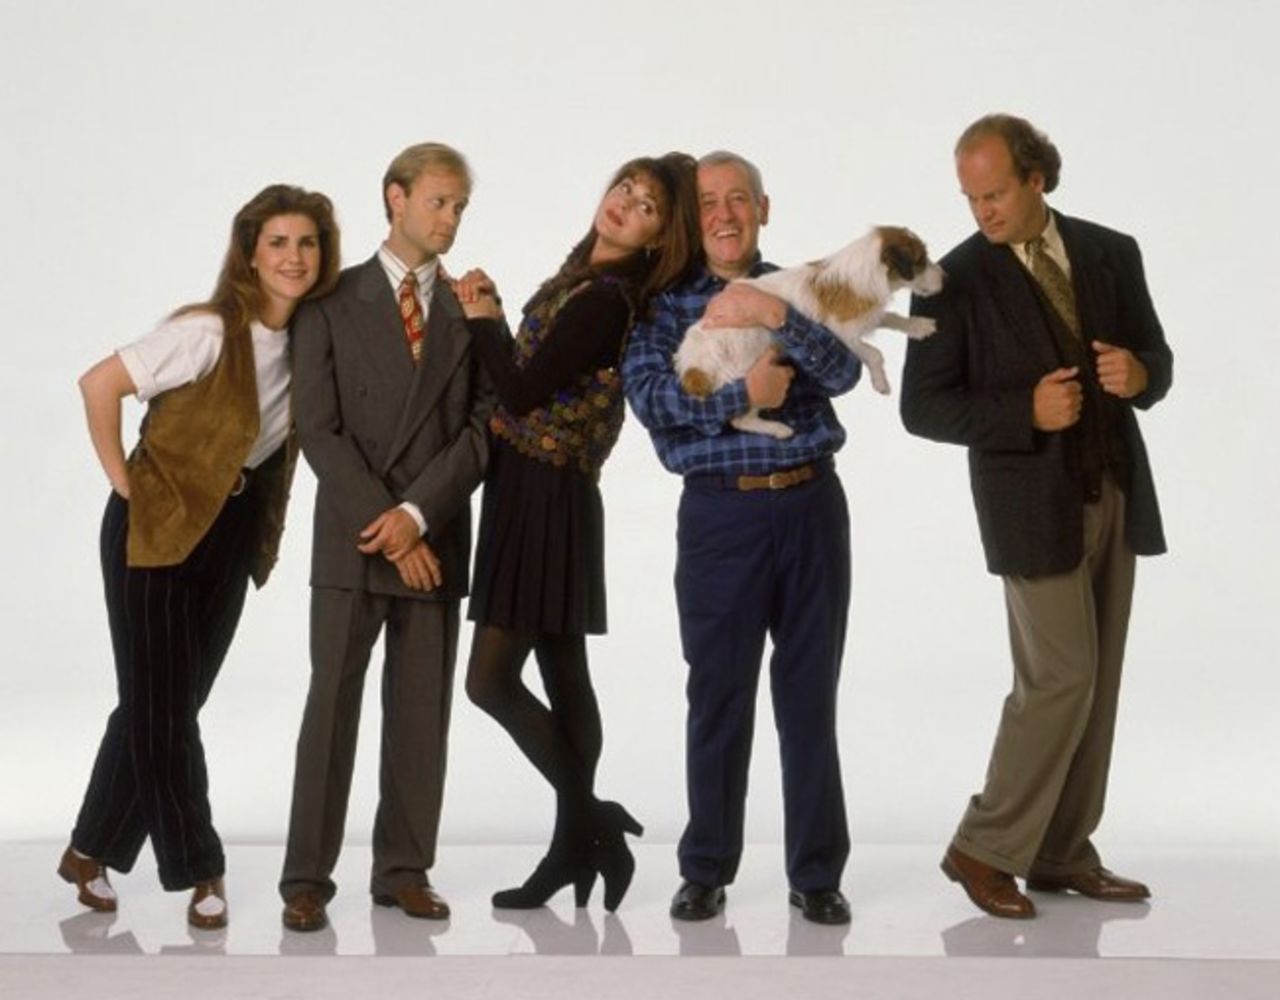 "Cheers'" spinoff "Frasier" was like catnip to Emmy voters. As Frasier Crane, Kelsey Grammer, right, played off against a number of wacky characters, especially David Hyde Pierce, second from left, as brother Niles.